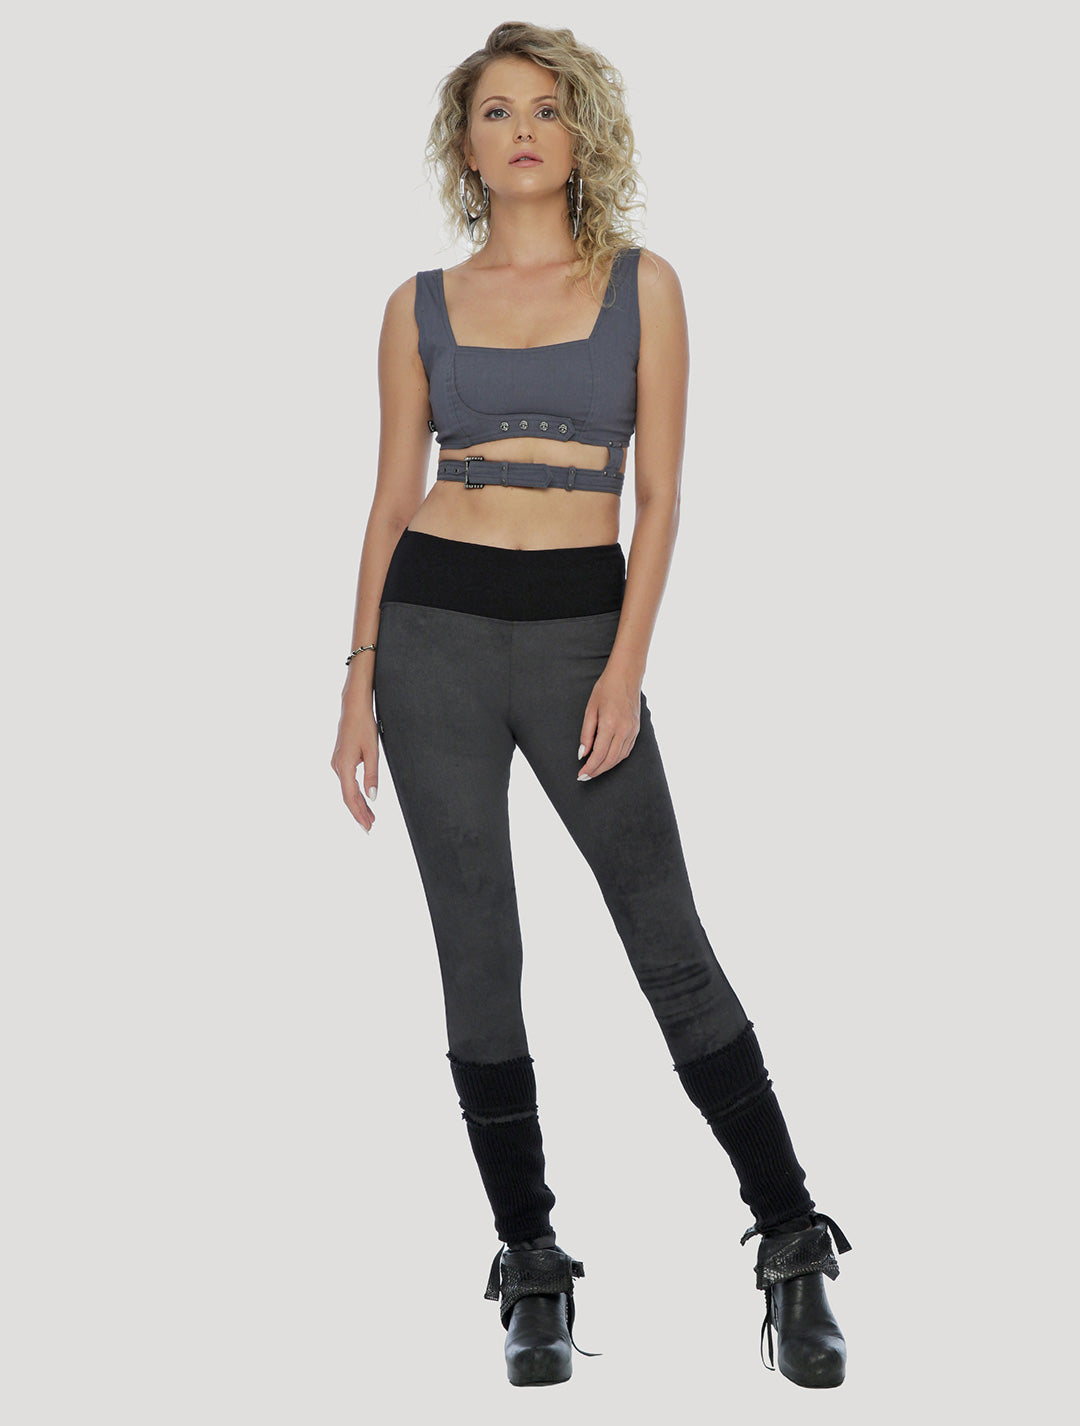 Integrity' Sleeveless Crop Top Made with Sustainable Fabrics - Psylo